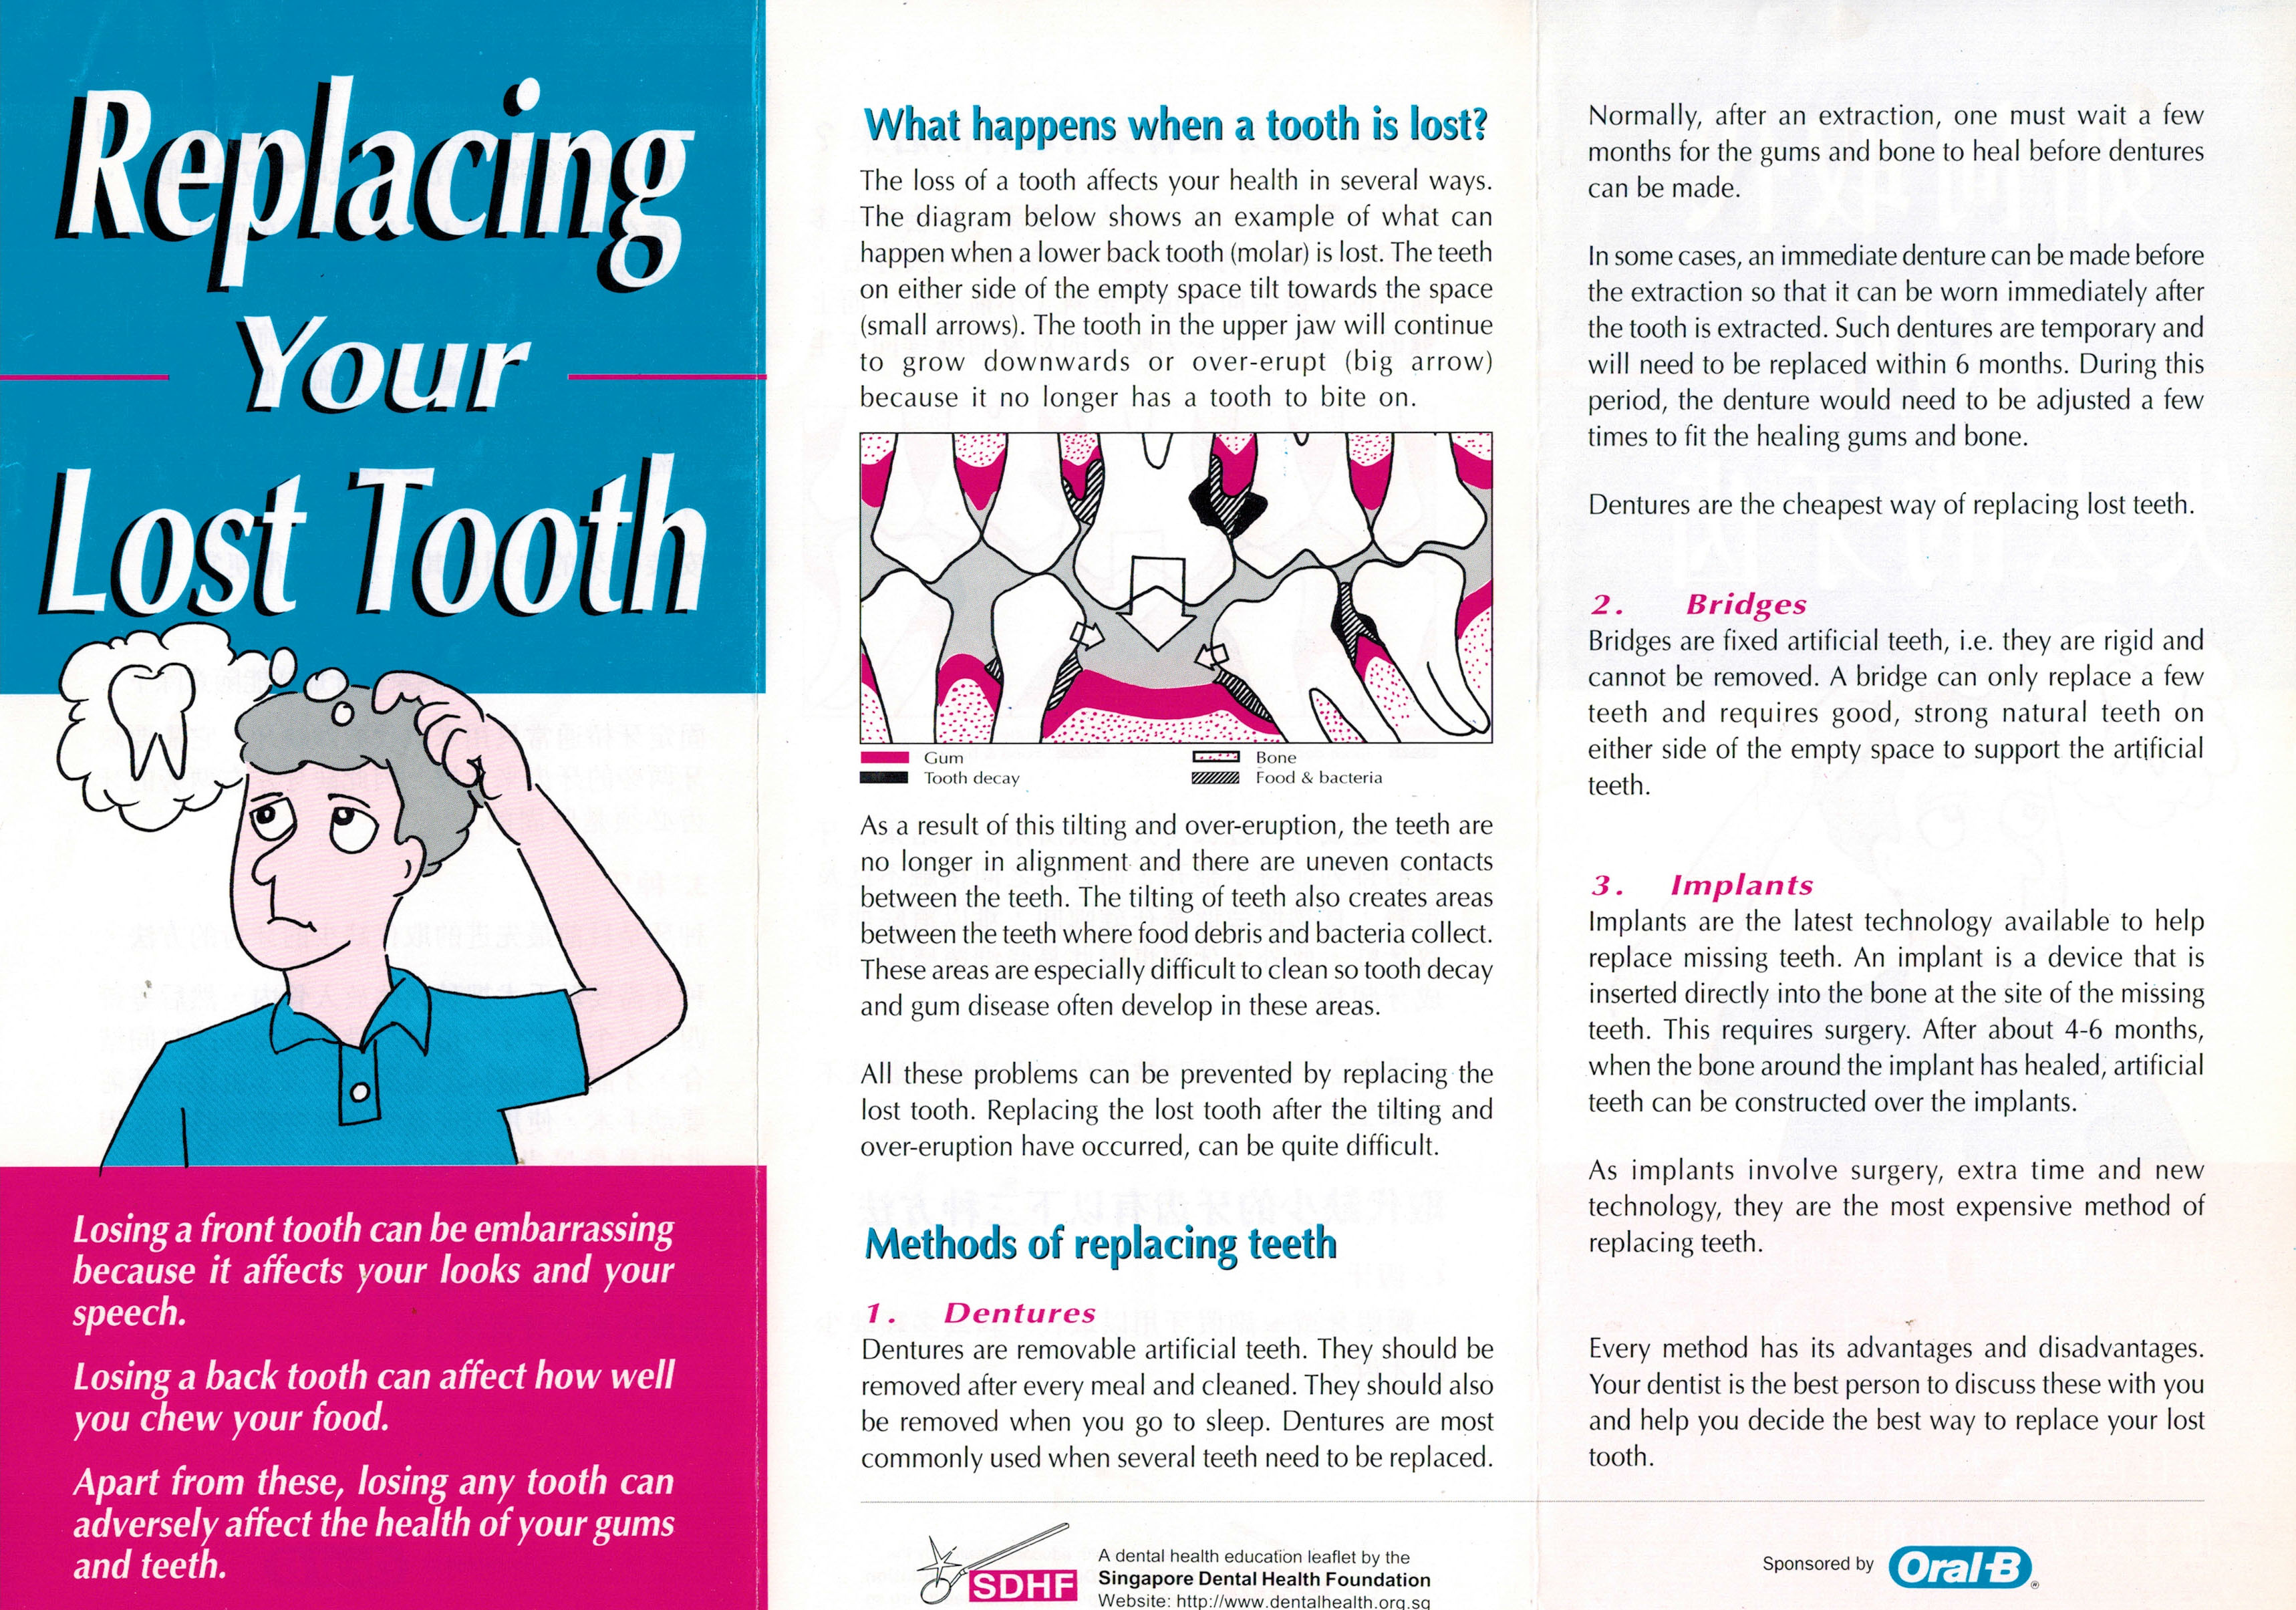 Replacing Your Lost Tooth